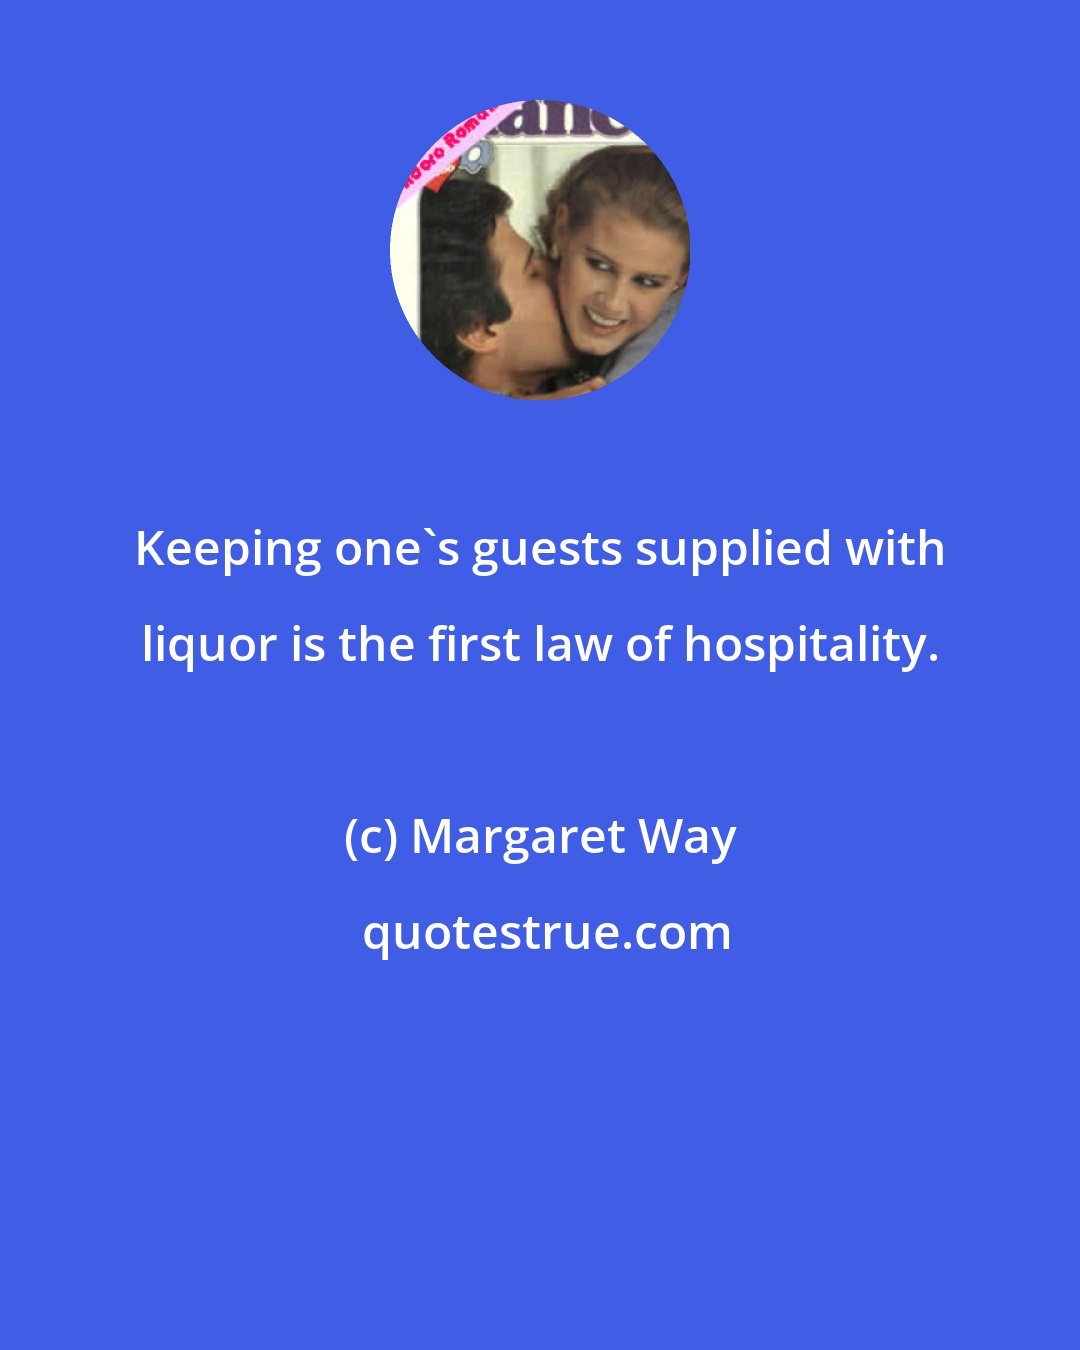 Margaret Way: Keeping one's guests supplied with liquor is the first law of hospitality.